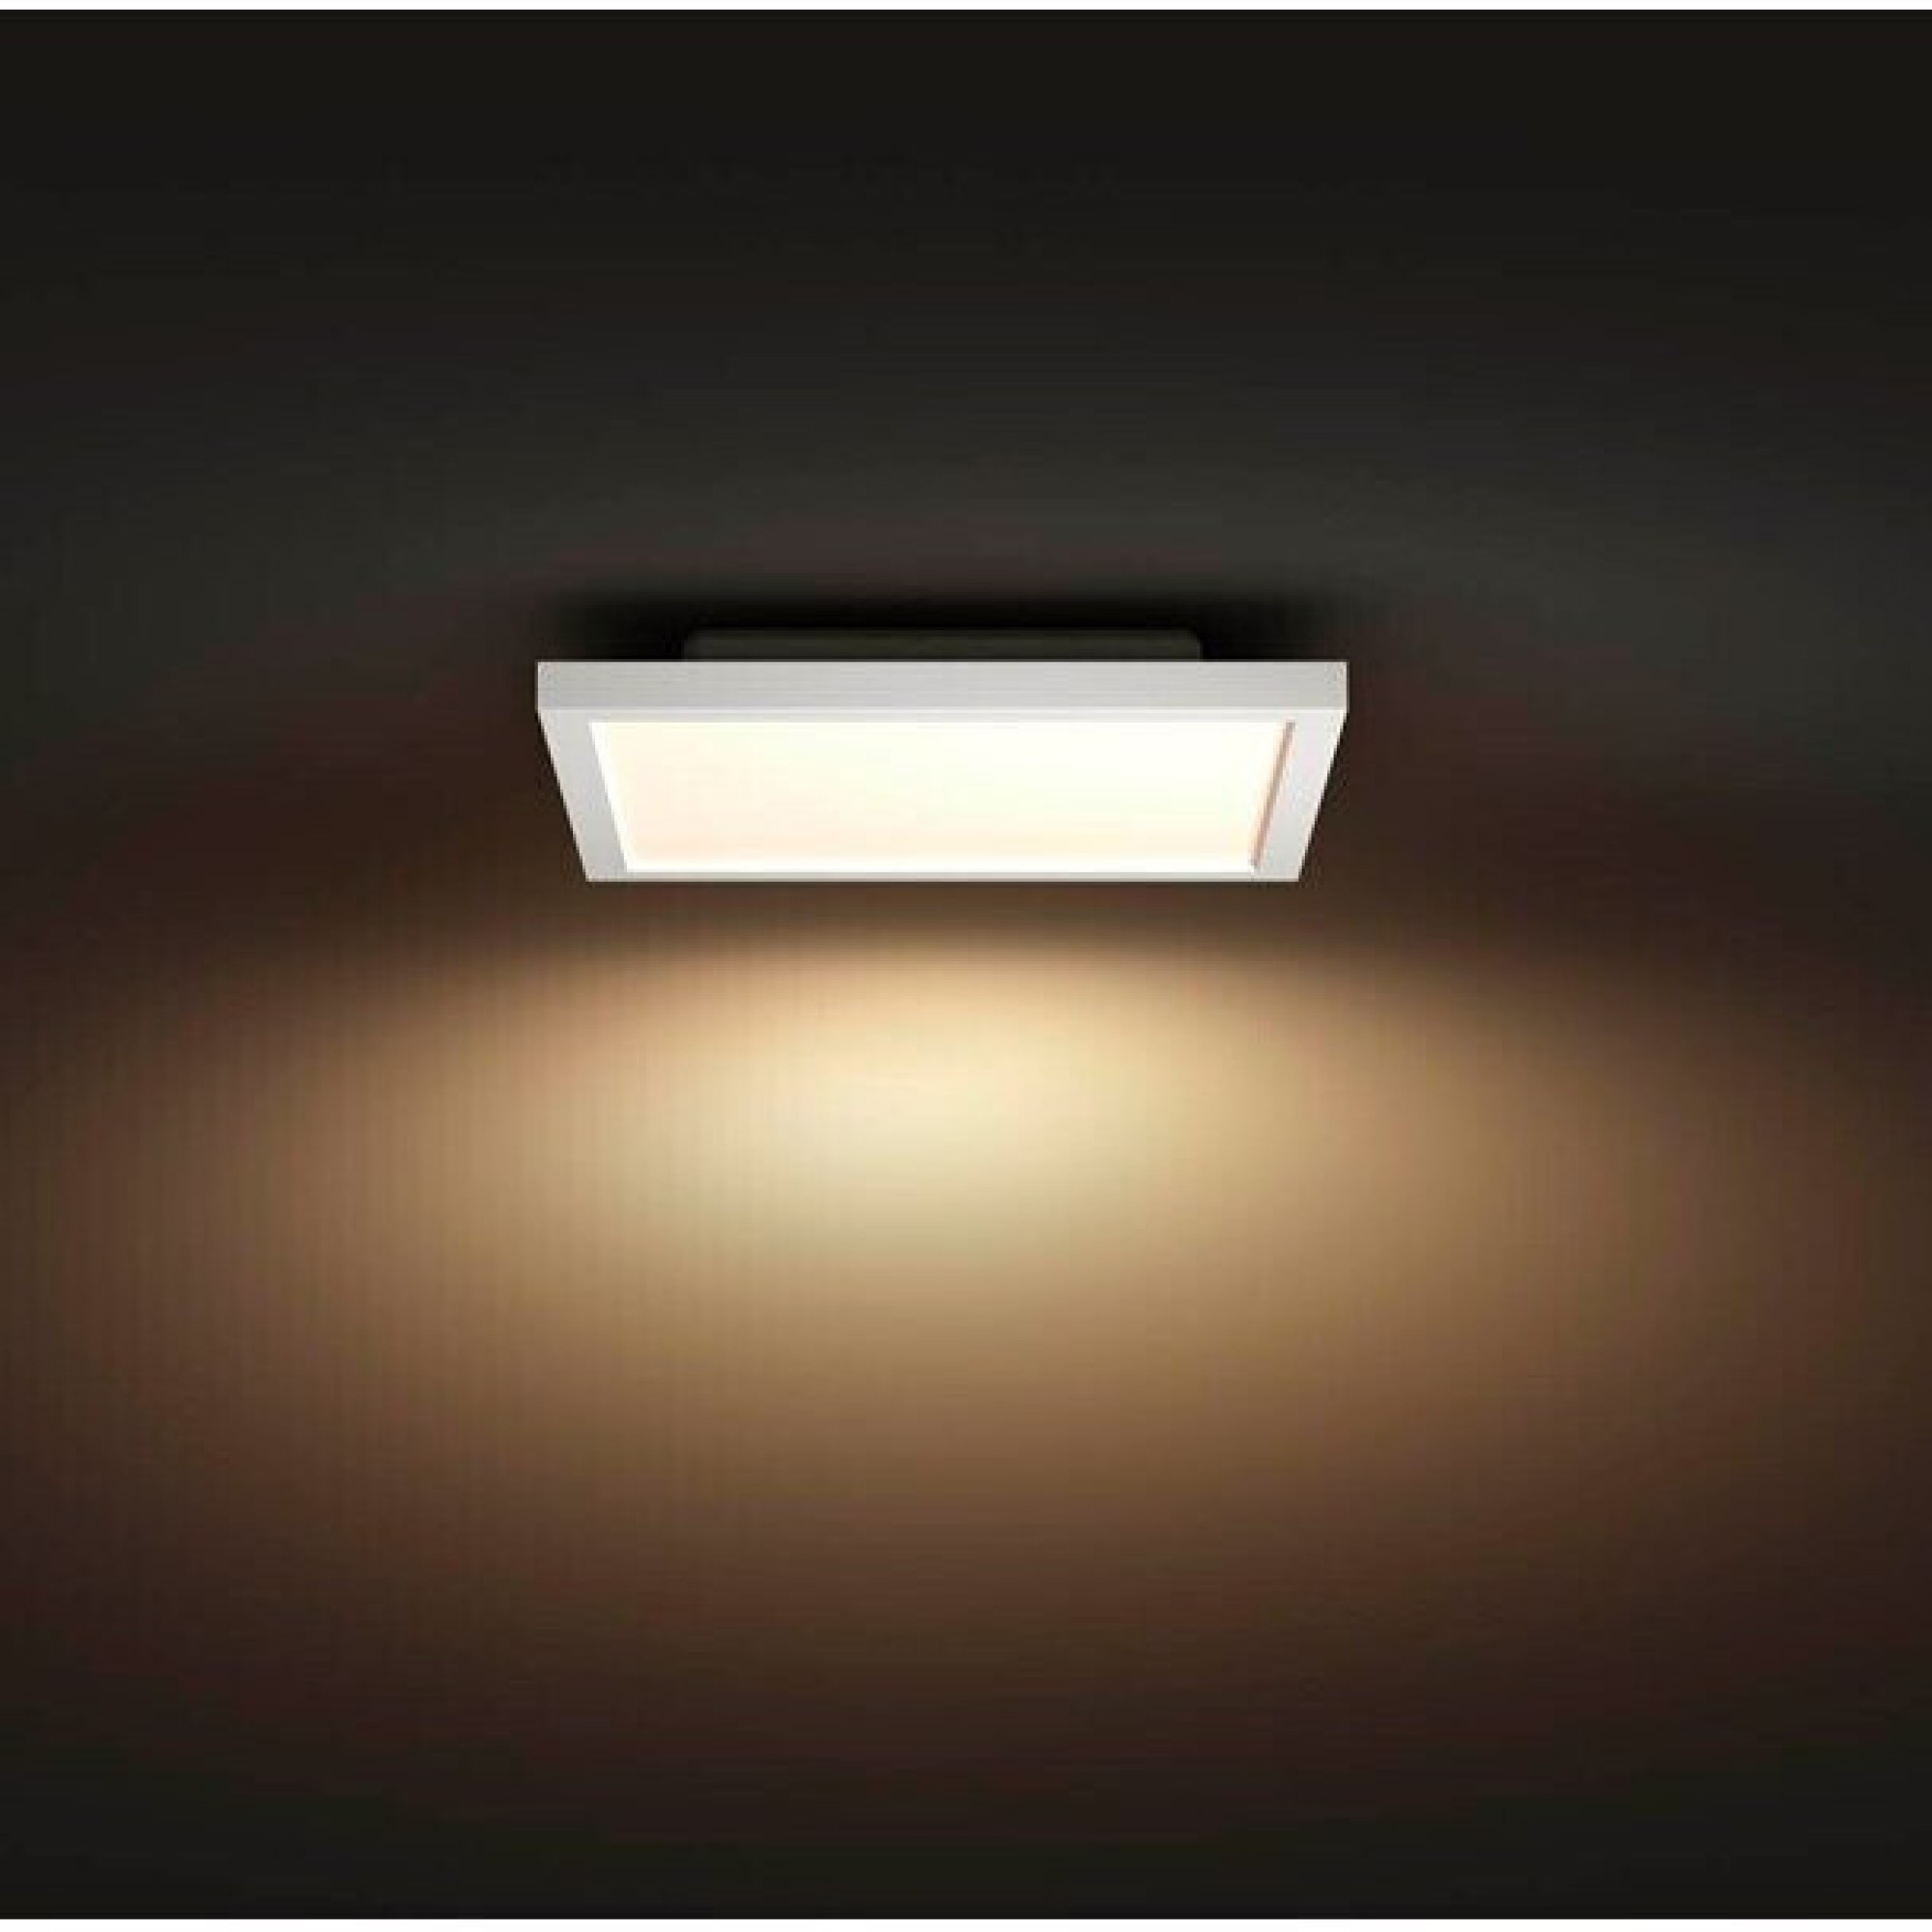 Philips Hue White Ambiance LED Panel Aurelle white 30x30cm incl. Dimmer Switch 1820lm